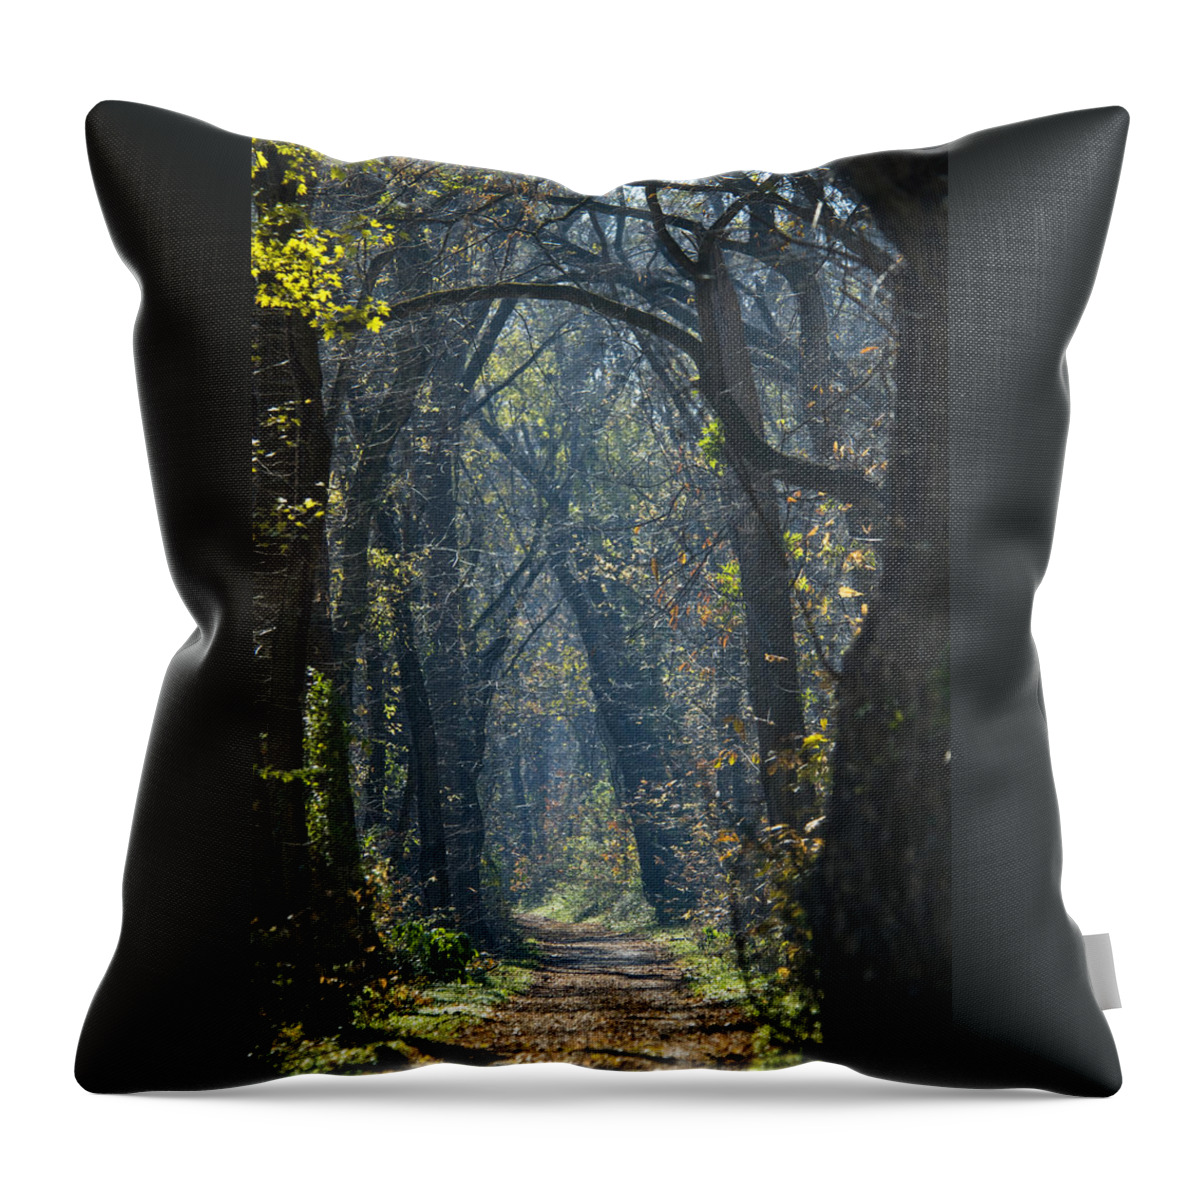 American Throw Pillow featuring the photograph Into The Wood by Brian Green